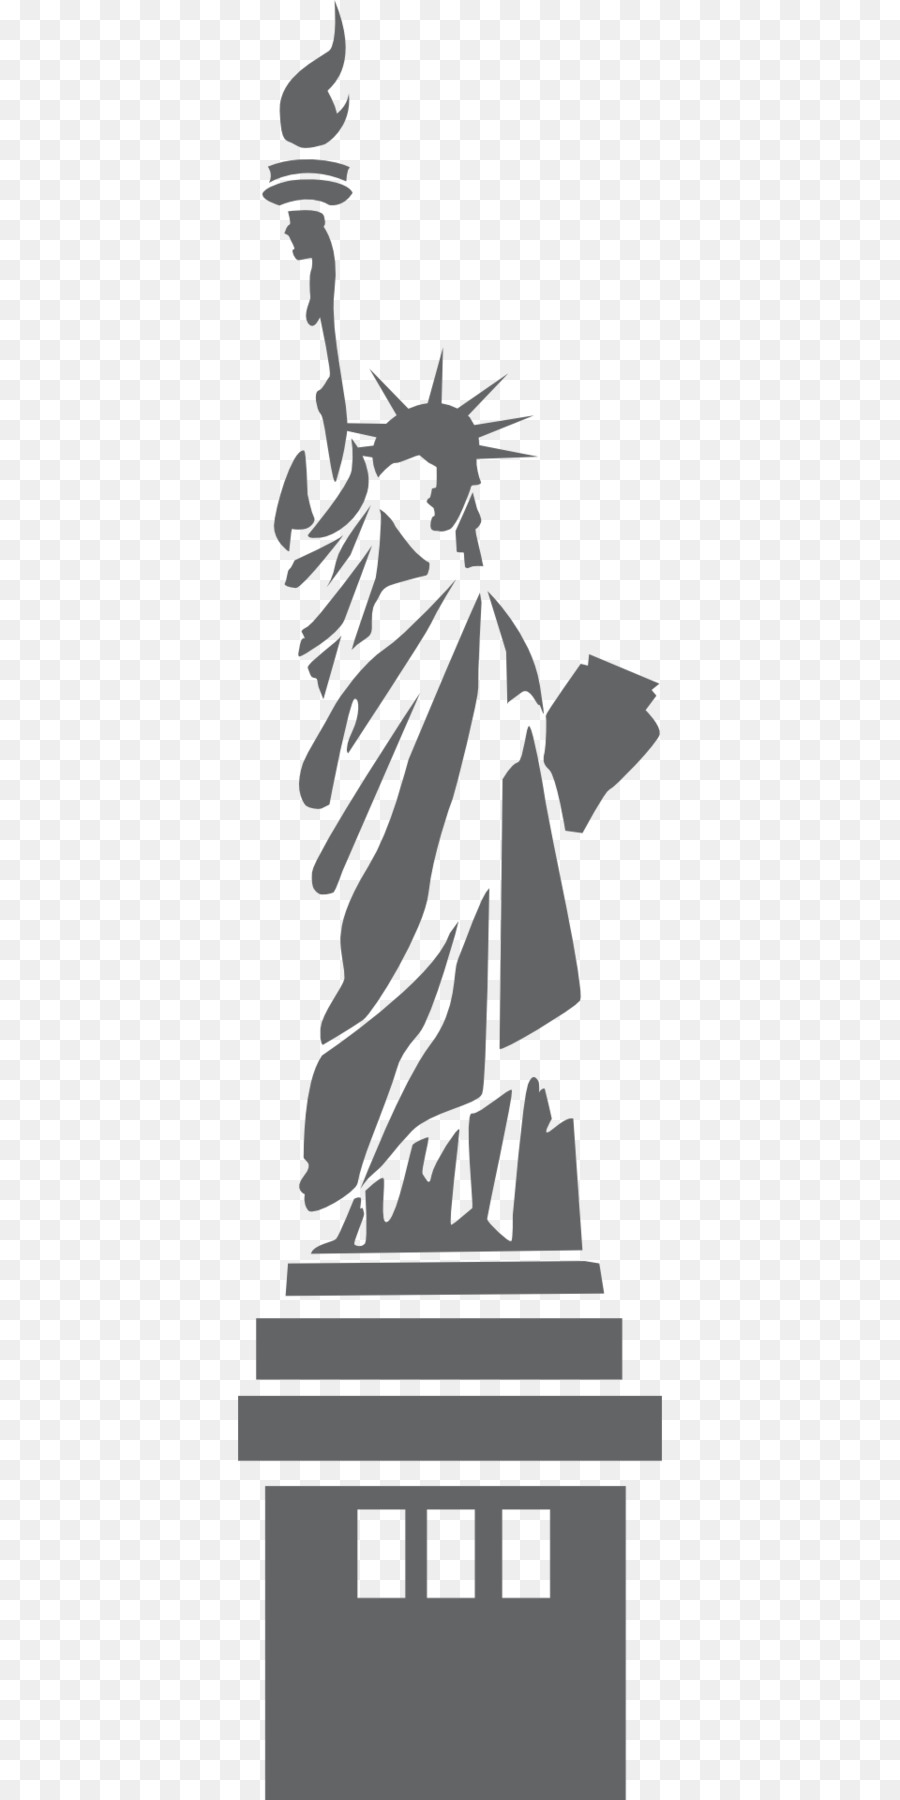 Statue Of Liberty Silhouette Vector